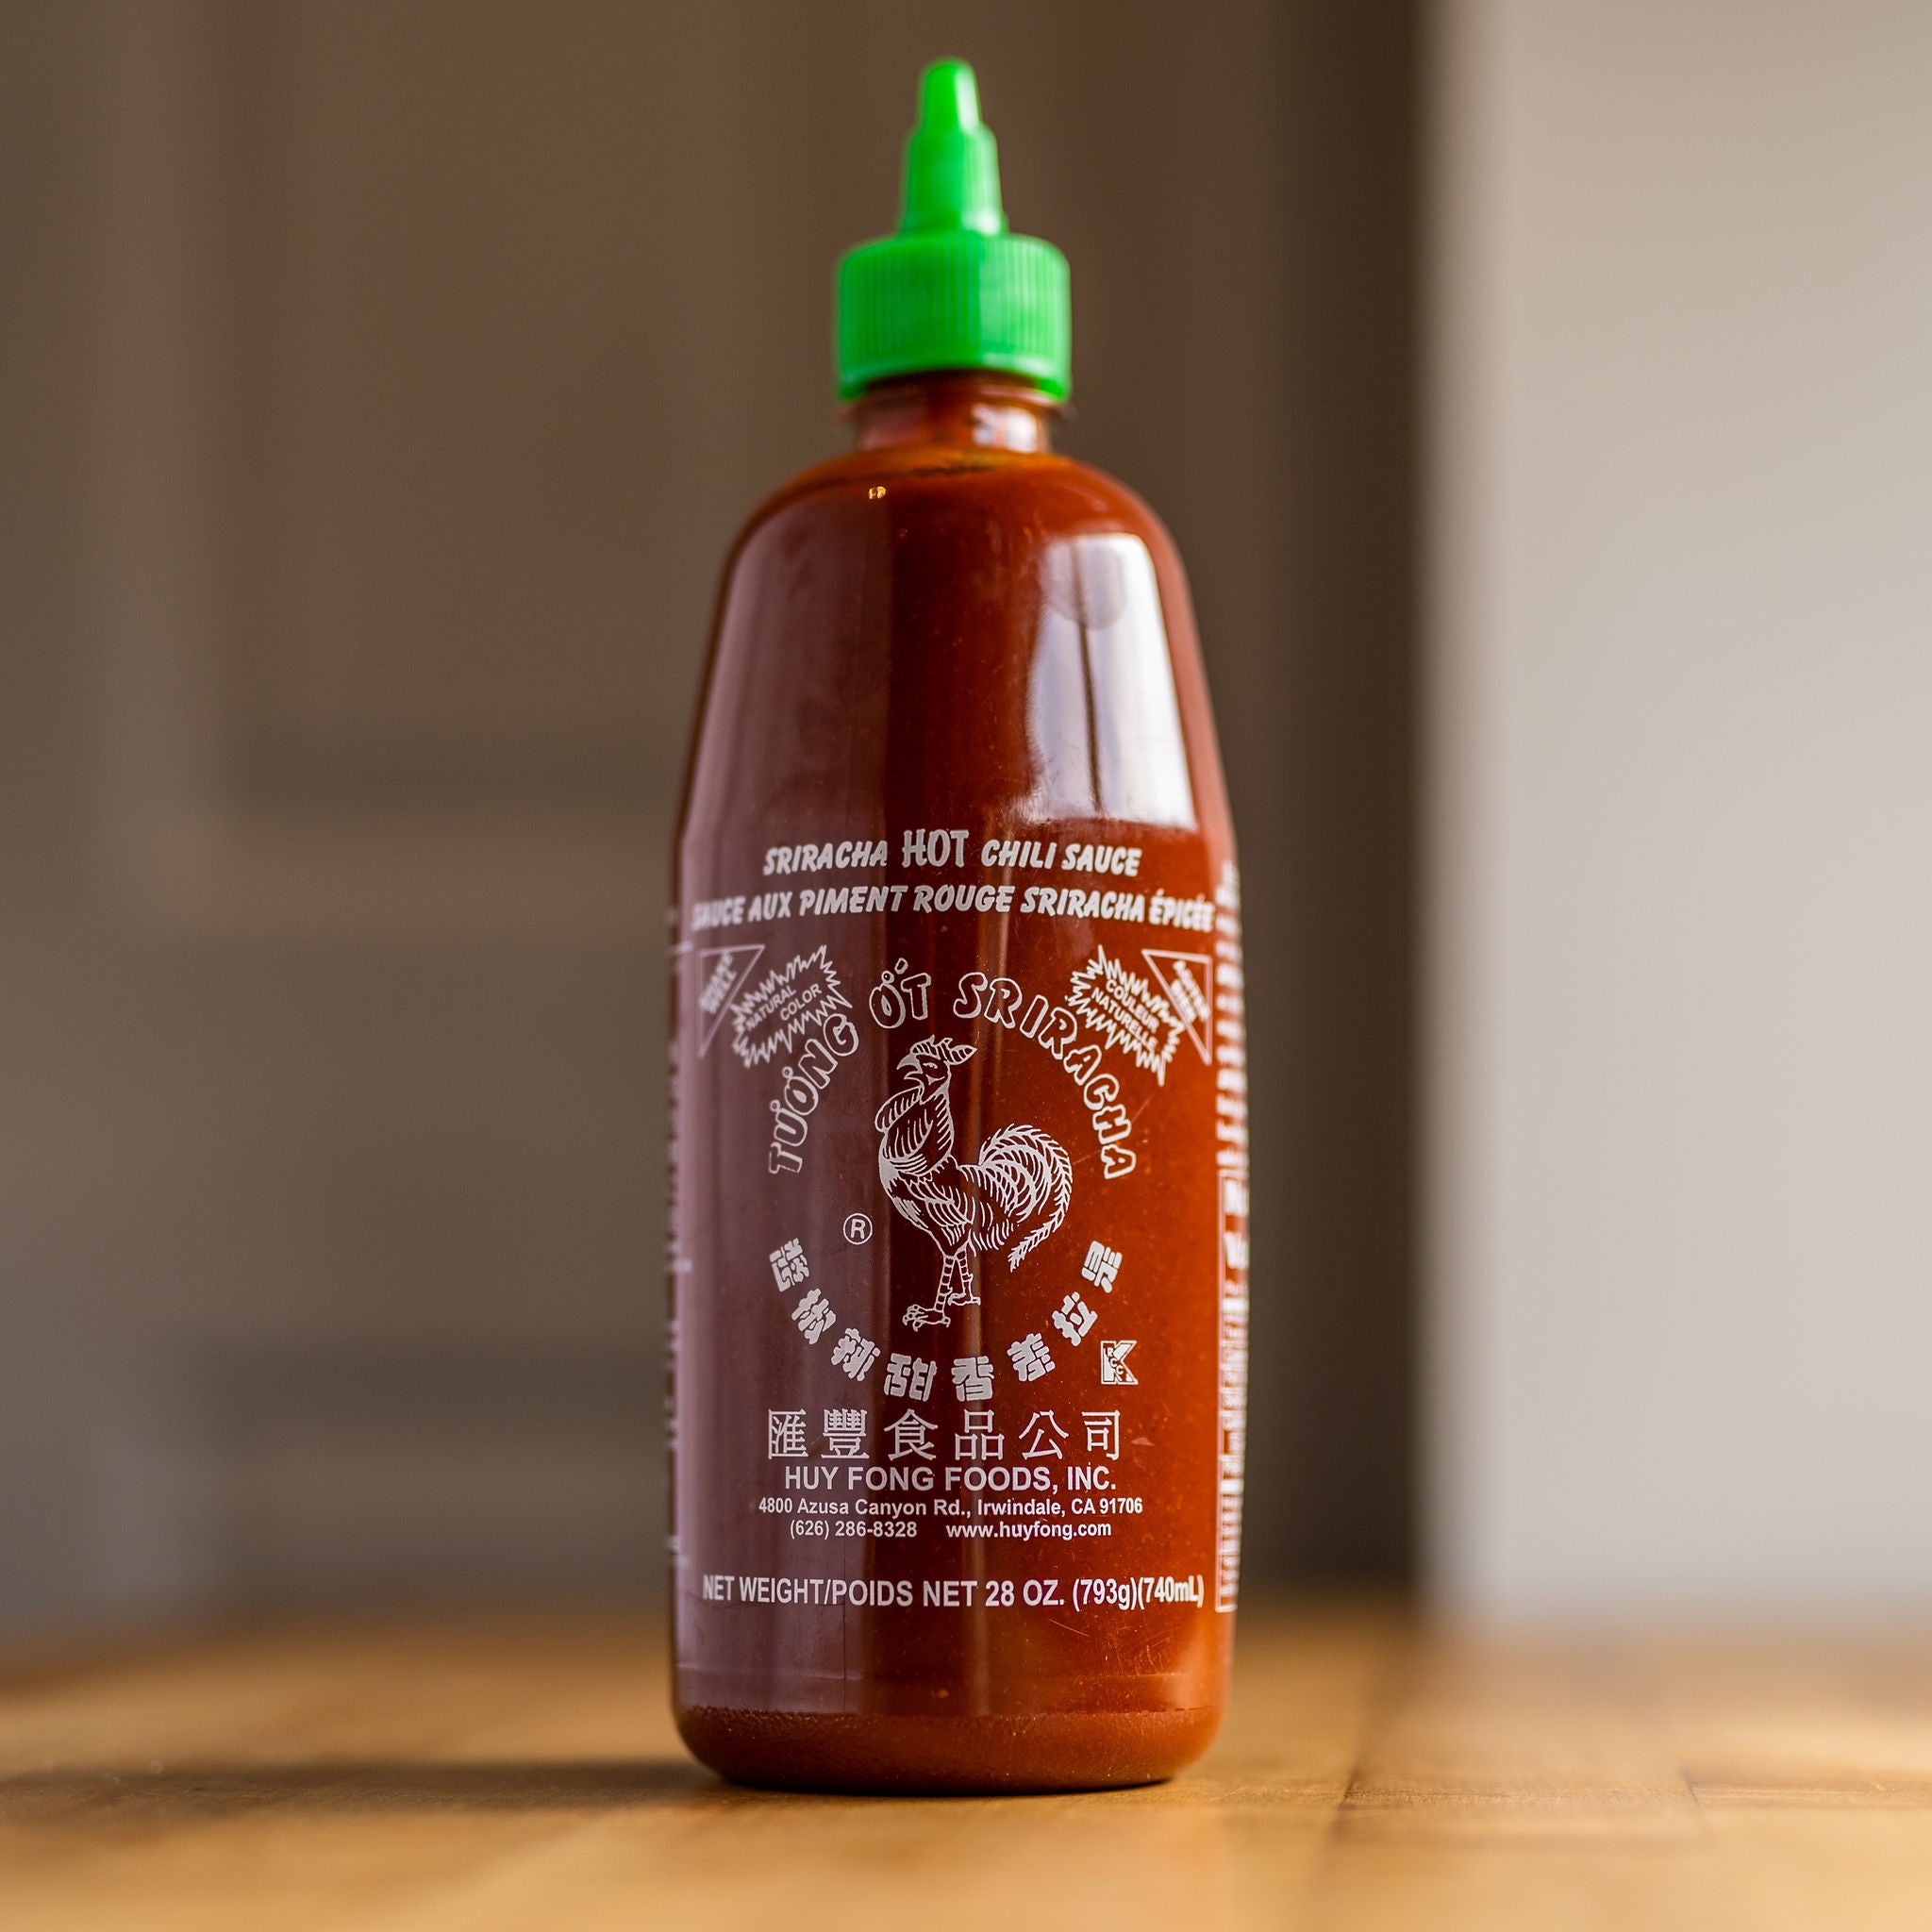 Huy Fong Foods, Inc. – Known Worldwide for Our HOT Chili Sauces